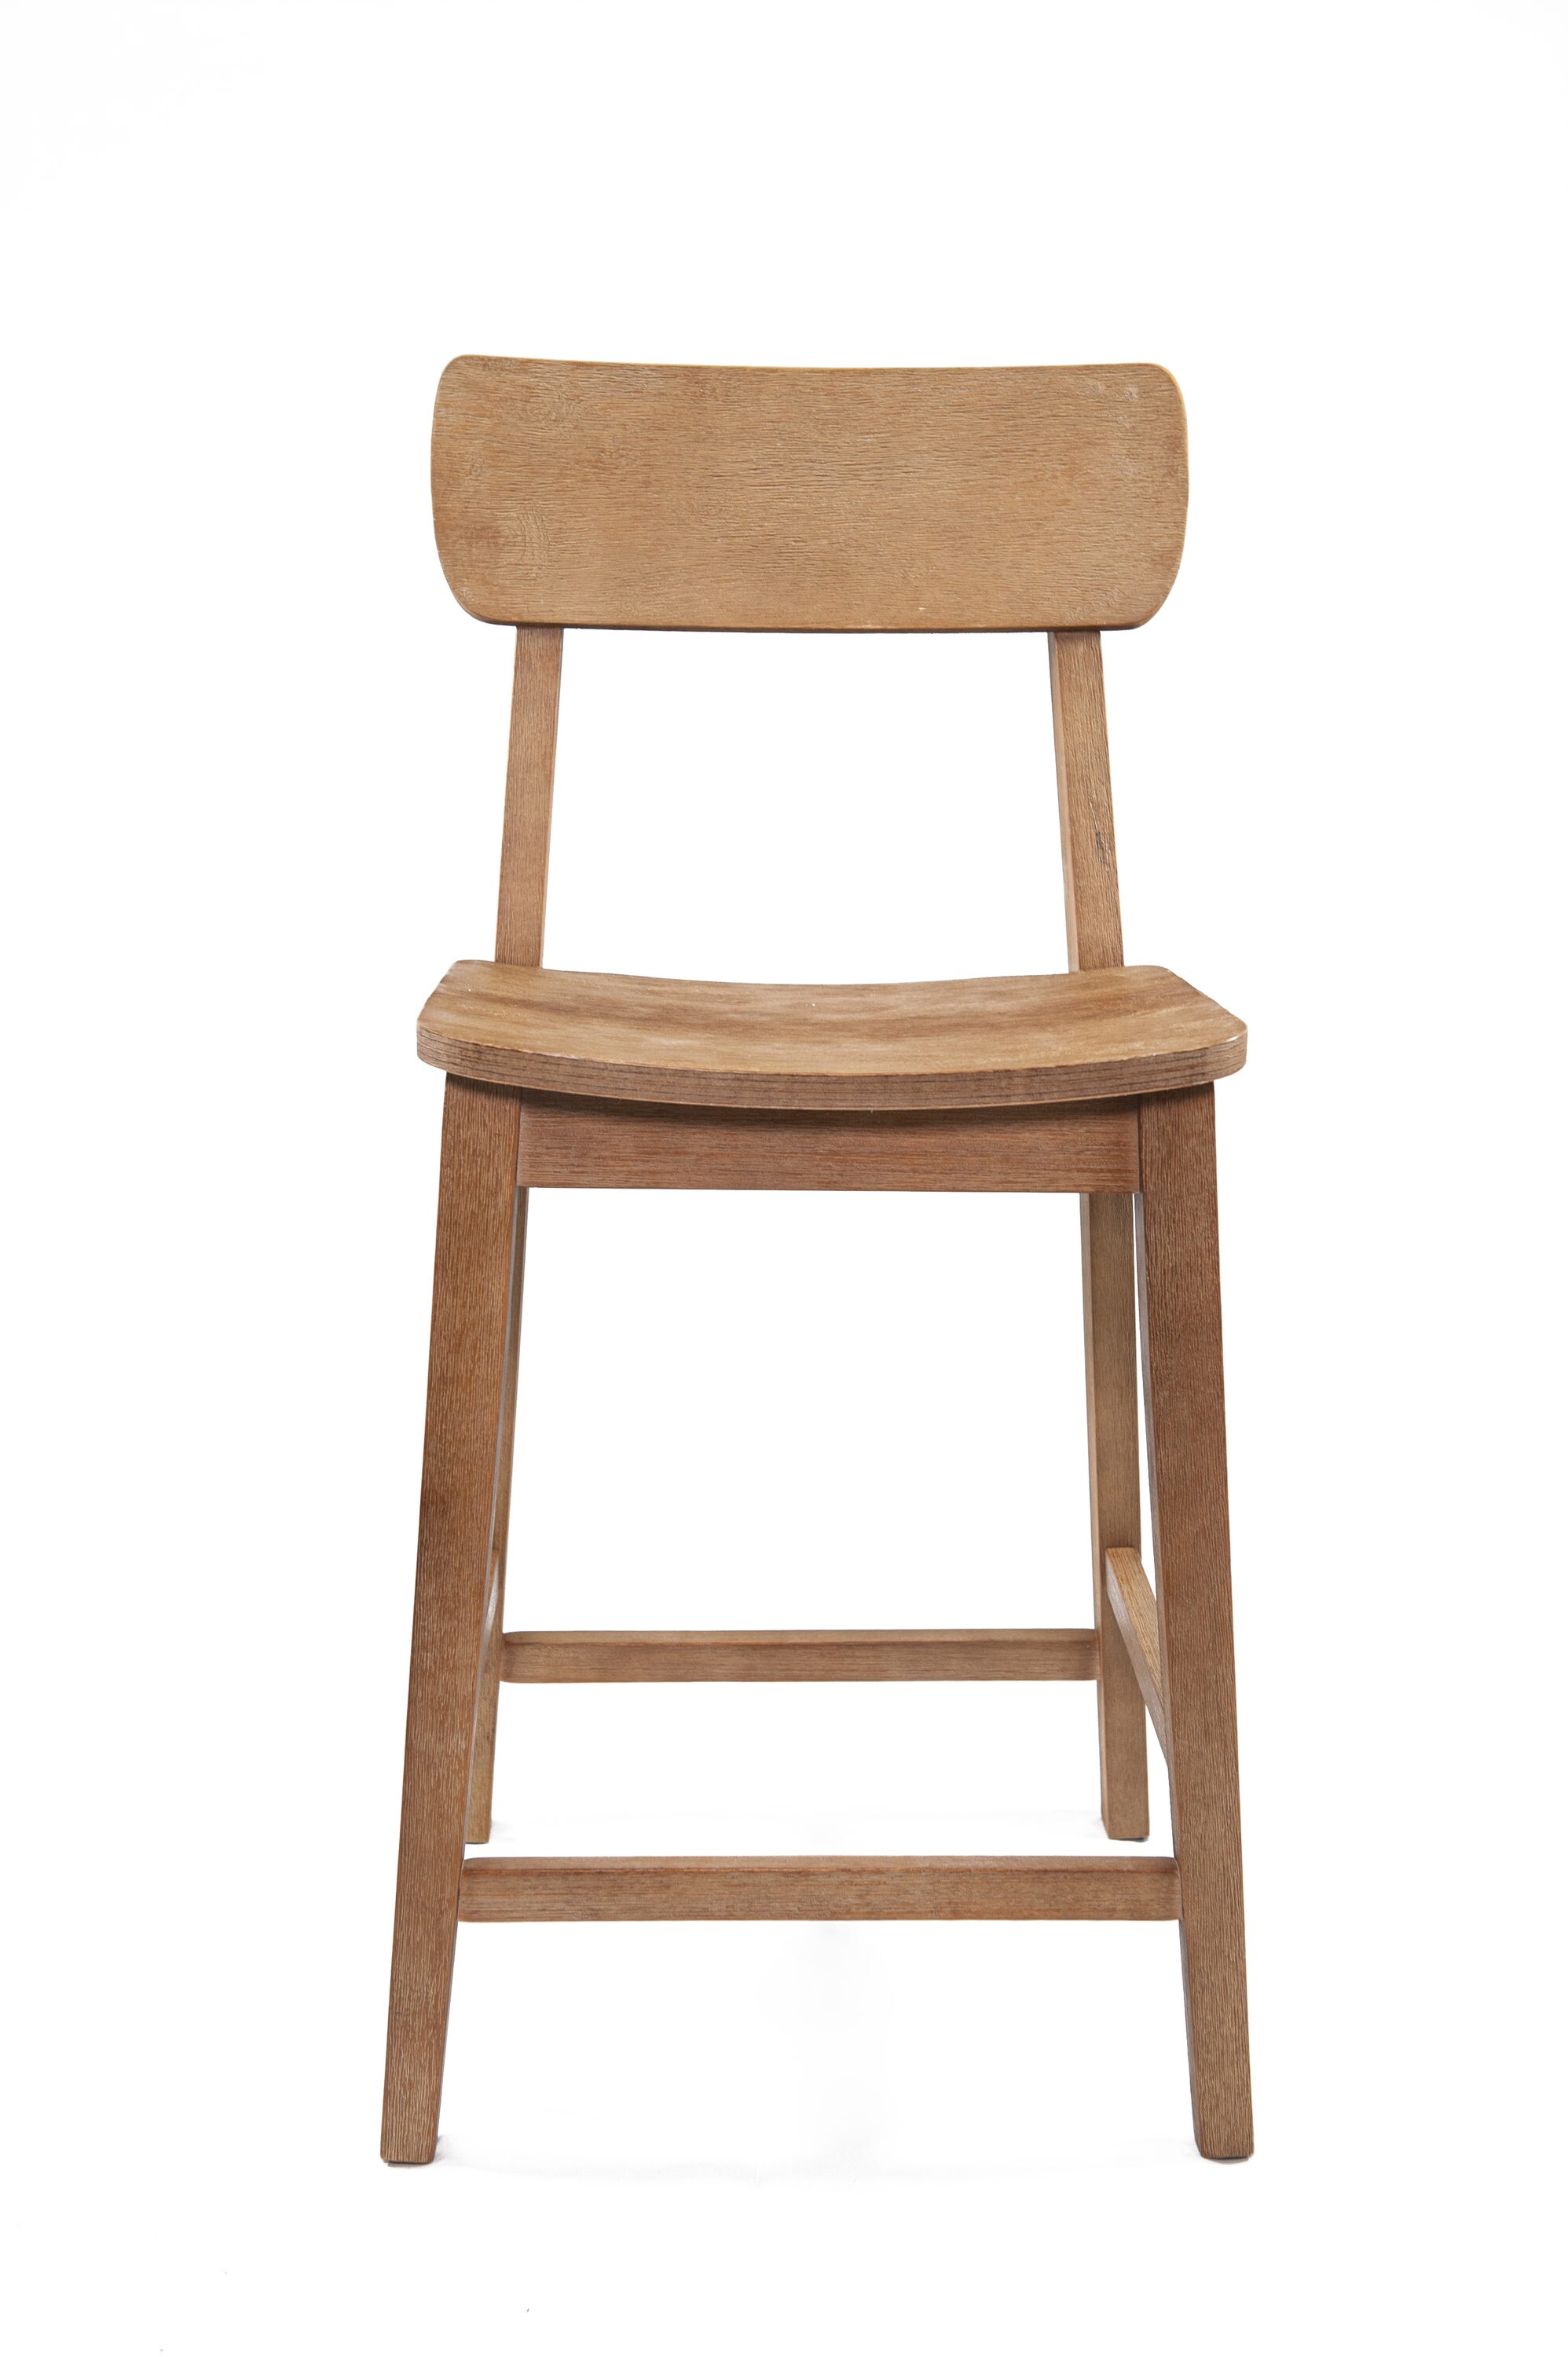 Wood Options Rustic Hickory Panel Back 24" Swivel Stool with Arms 